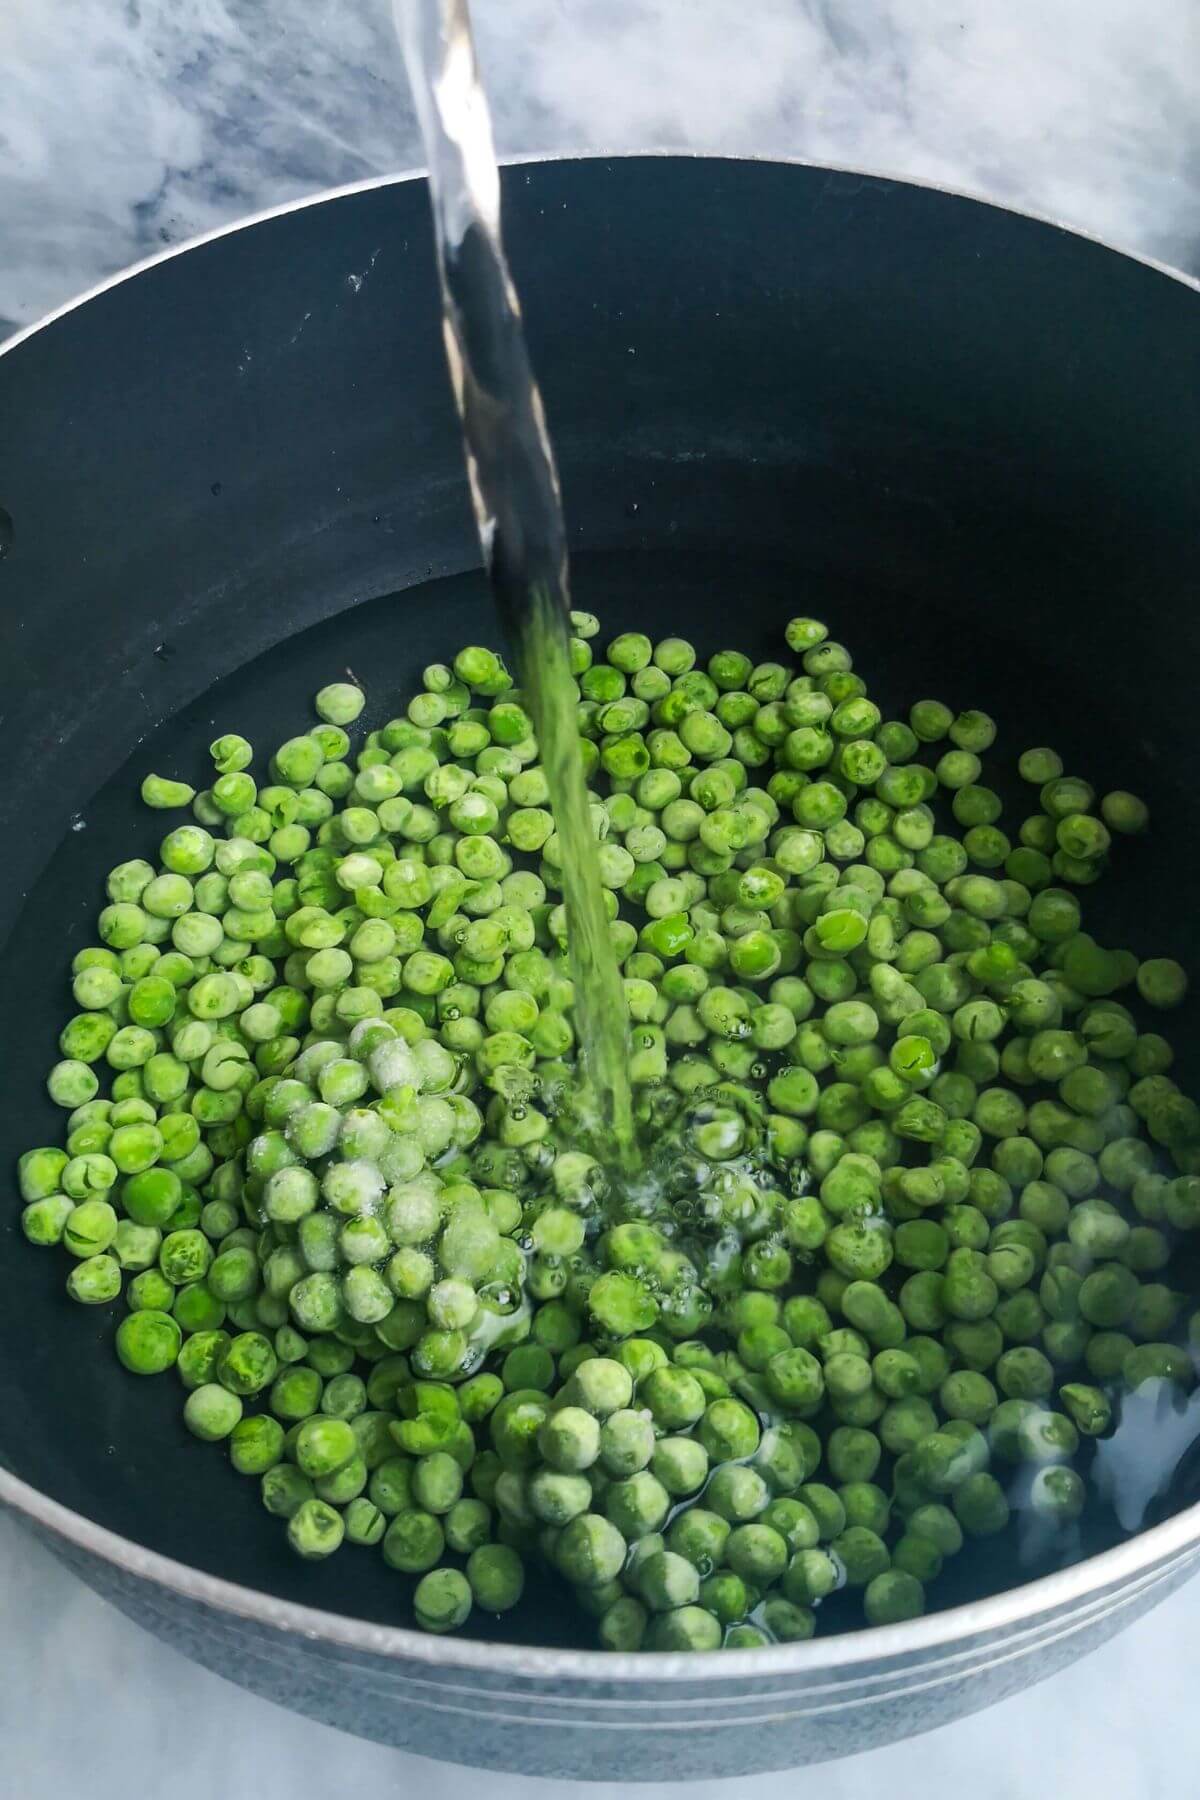 Water being poured into a large black pot filled with peas.